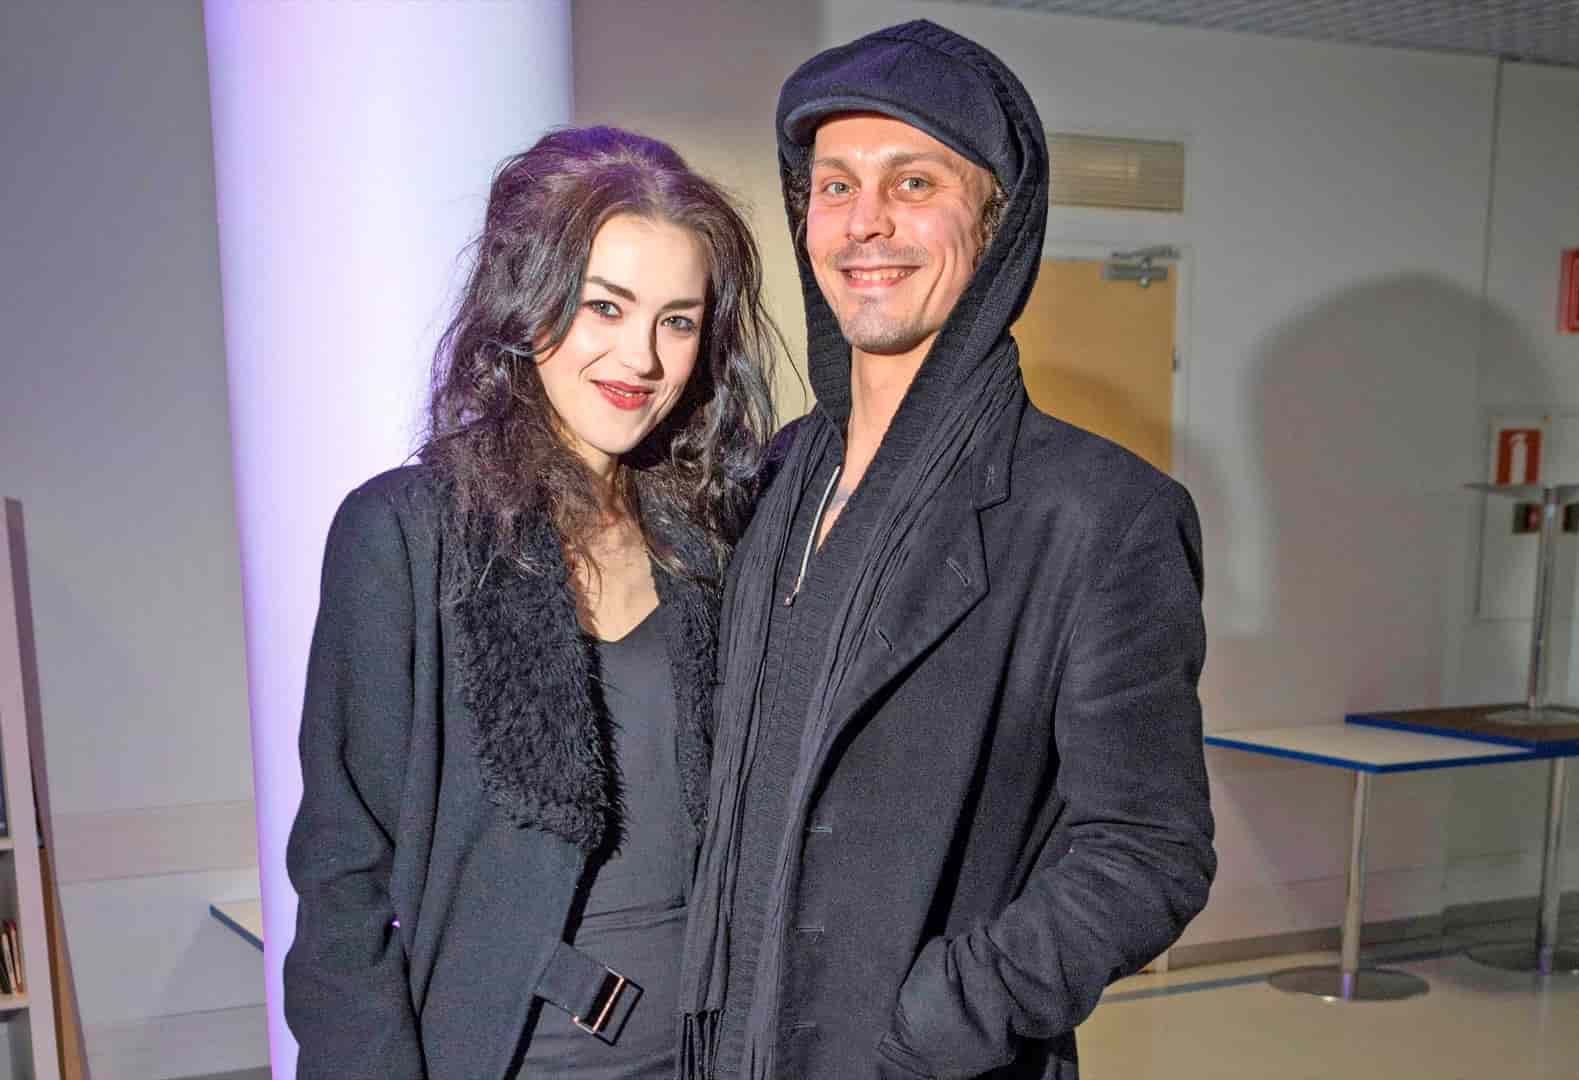 Image of Ville Valo with his girlfriend, Christel Karhu